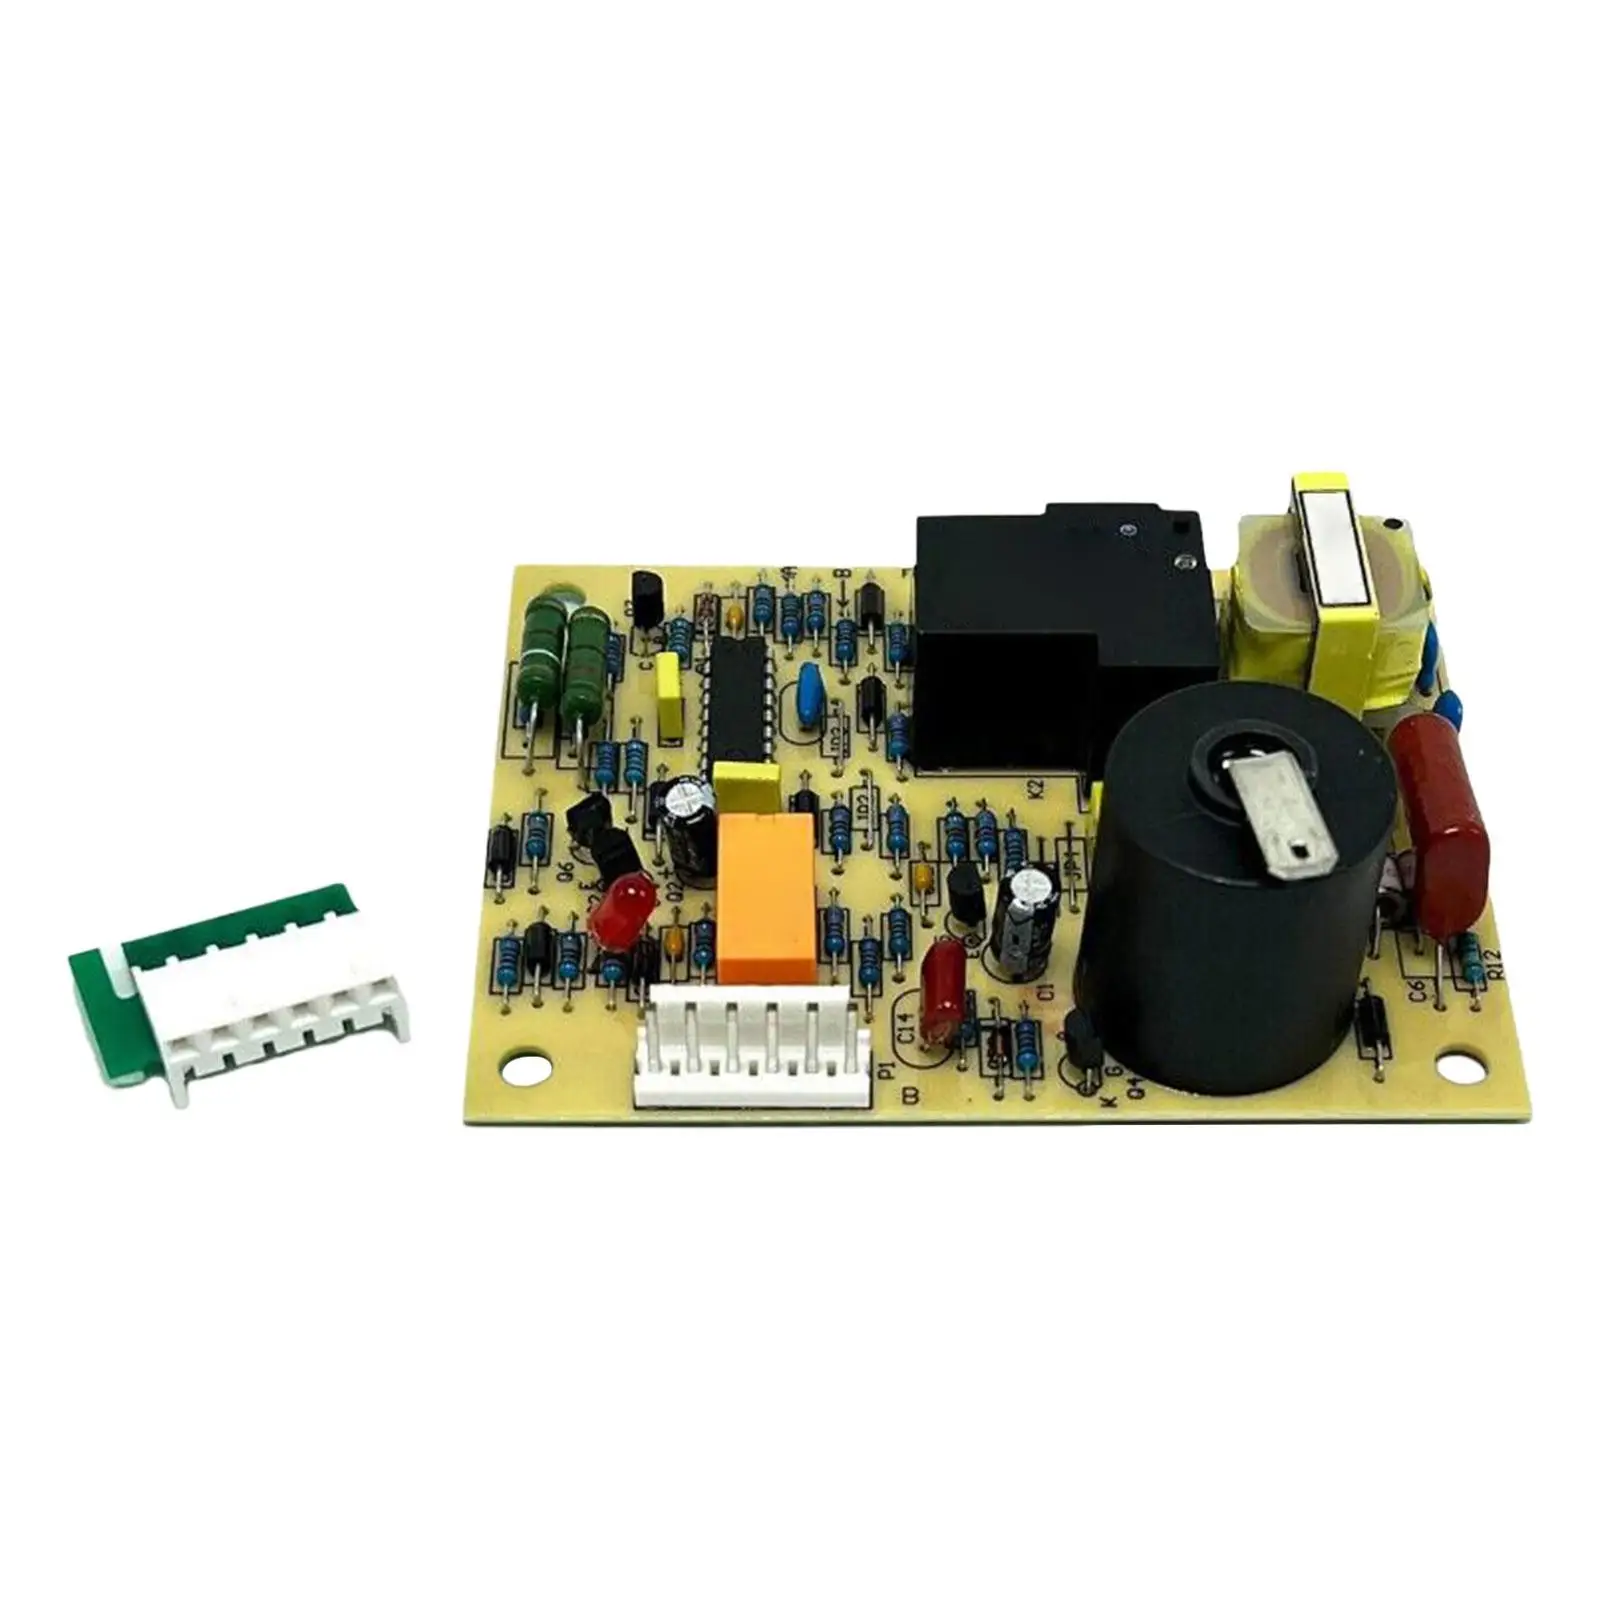 RV Ignition Control Board Spare Parts 31501 Replaces Car Accessories for 7912-ii